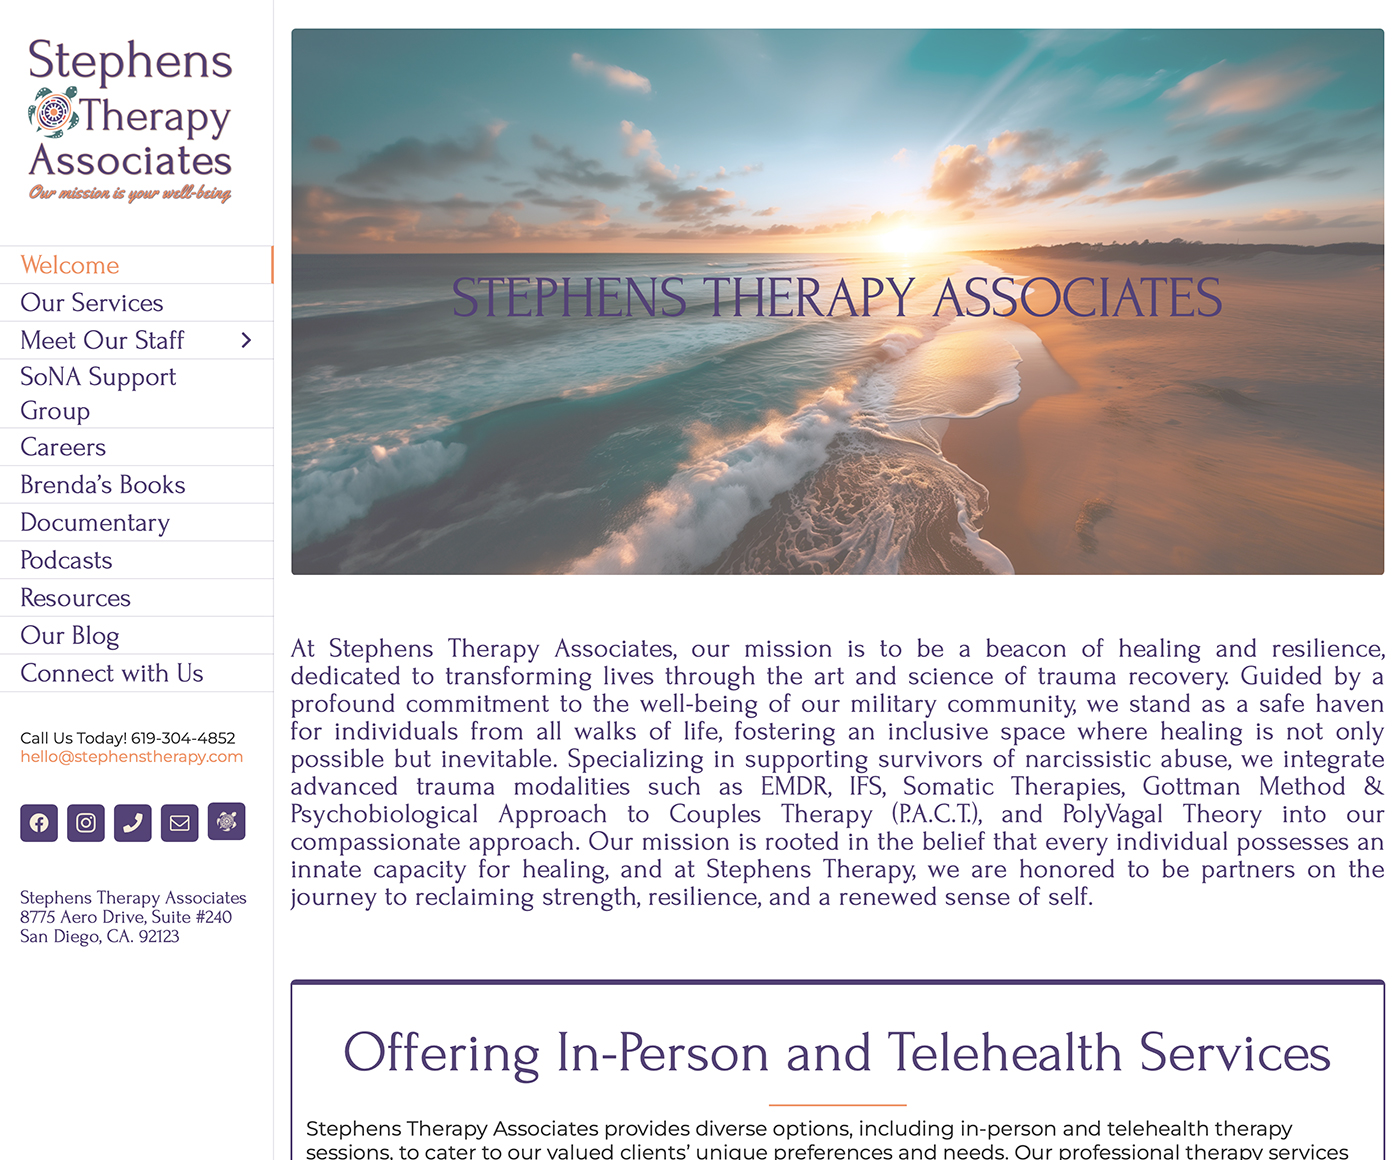 Stephens Therapy Associates